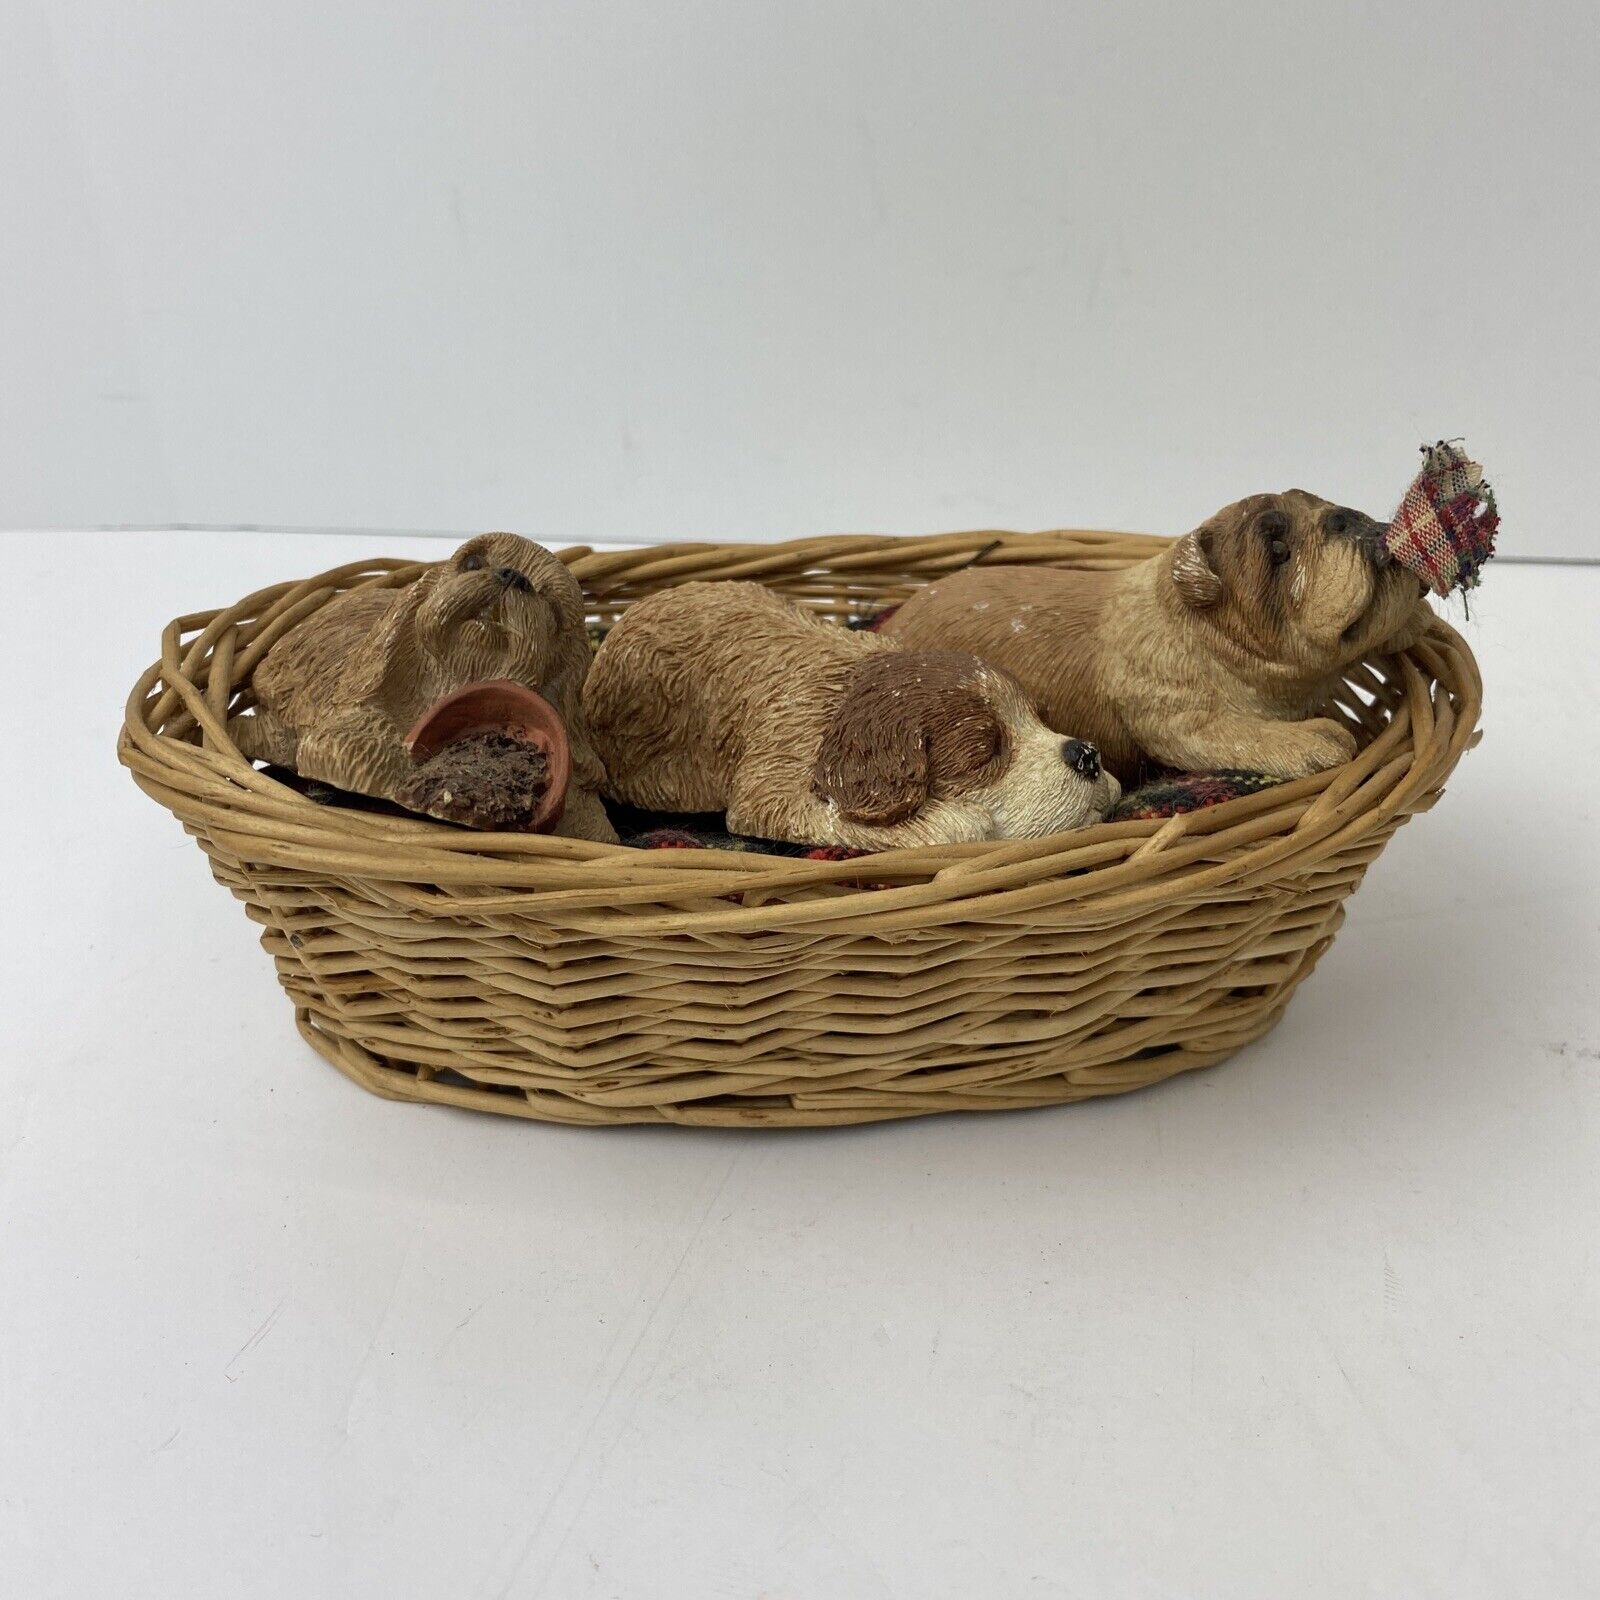 VTG Sandicast Lil\' Snoozer S13 & Pesky Peepers Lot Of 3 Dogs with Wicker Bed